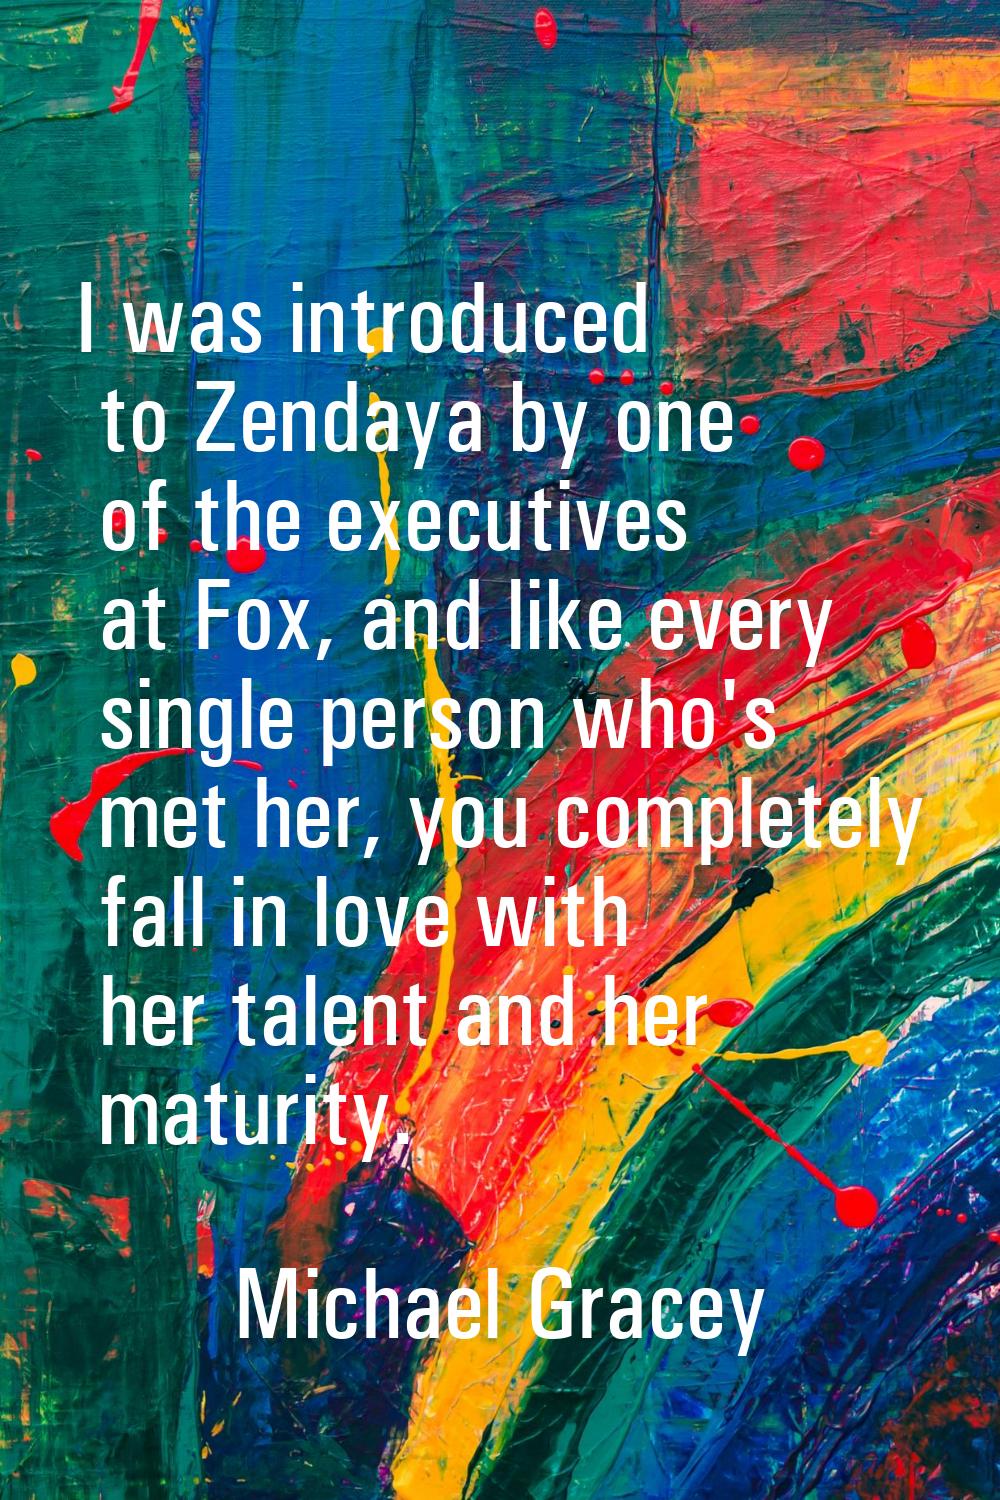 I was introduced to Zendaya by one of the executives at Fox, and like every single person who's met